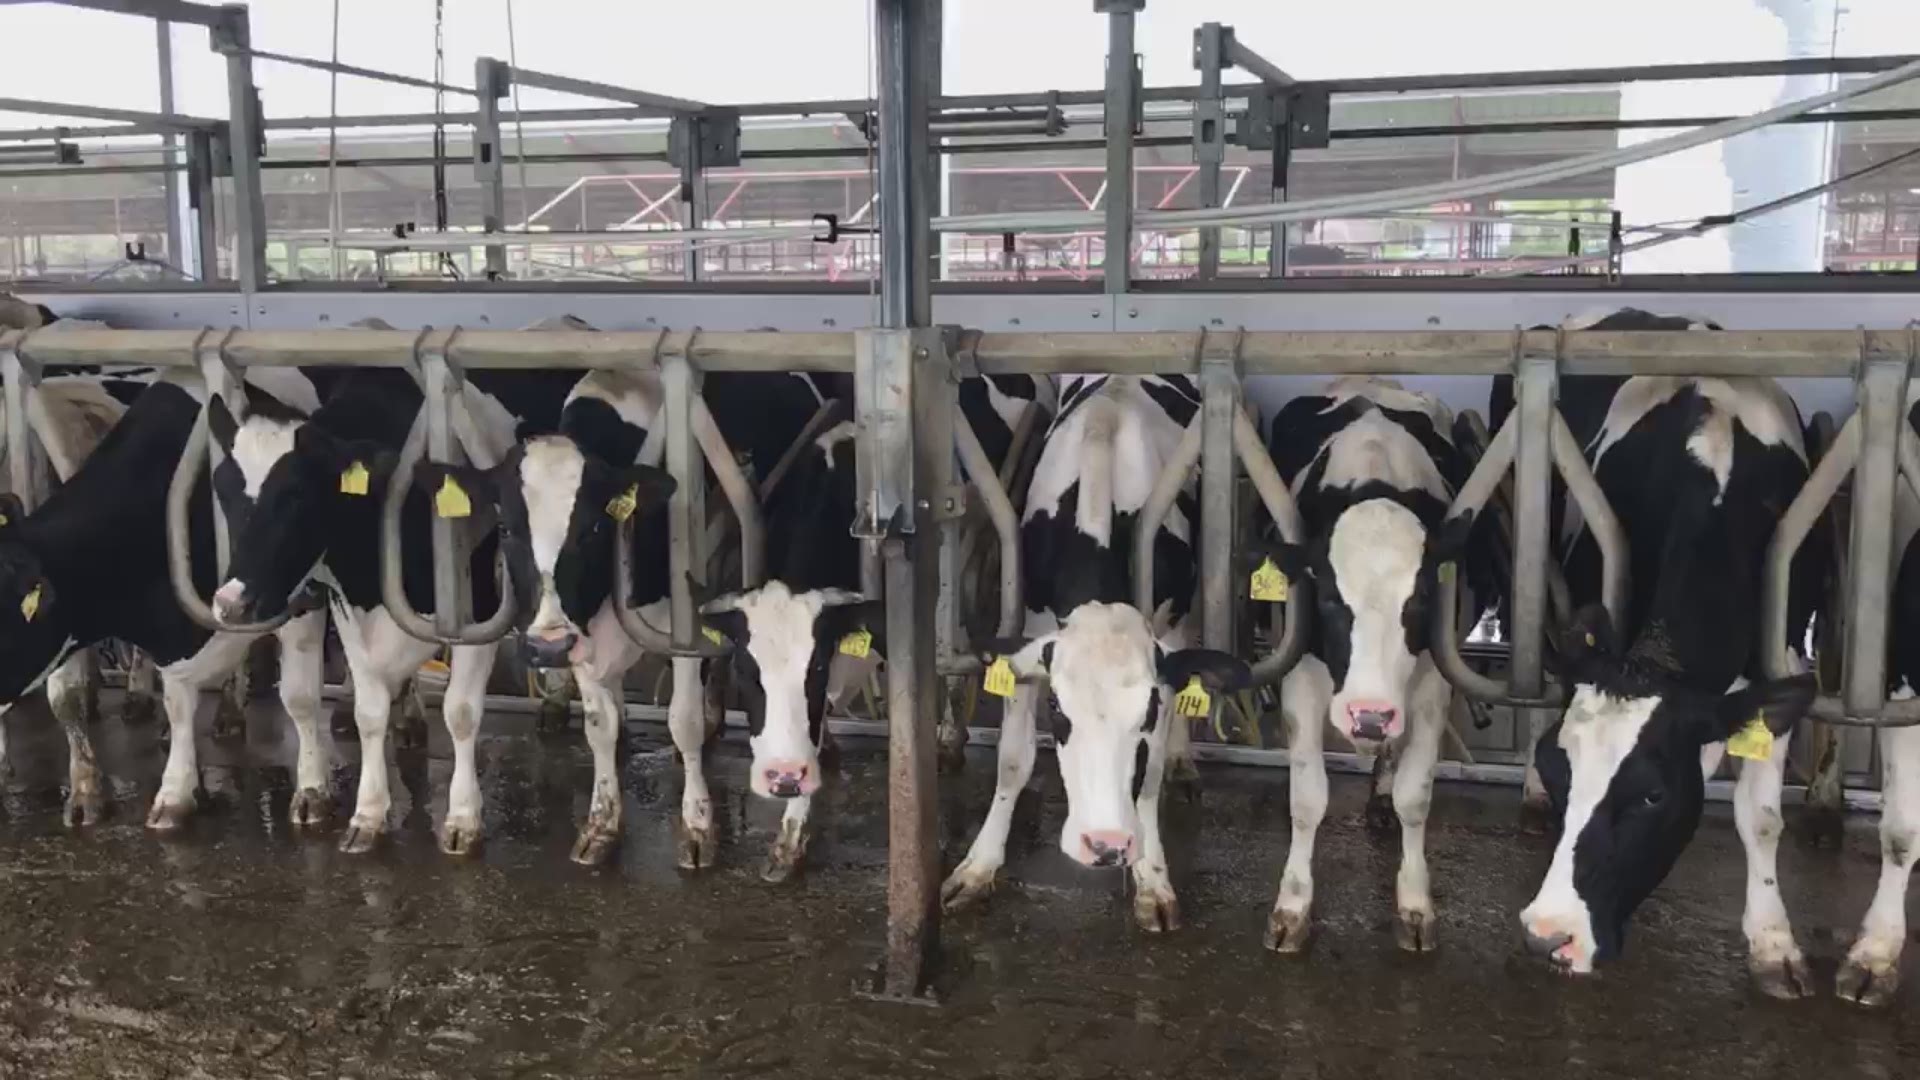 Dairy farmers in Texas have been forced to flush away thousands of gallons of milk as demand shrinks while restaurants and schools are closed.